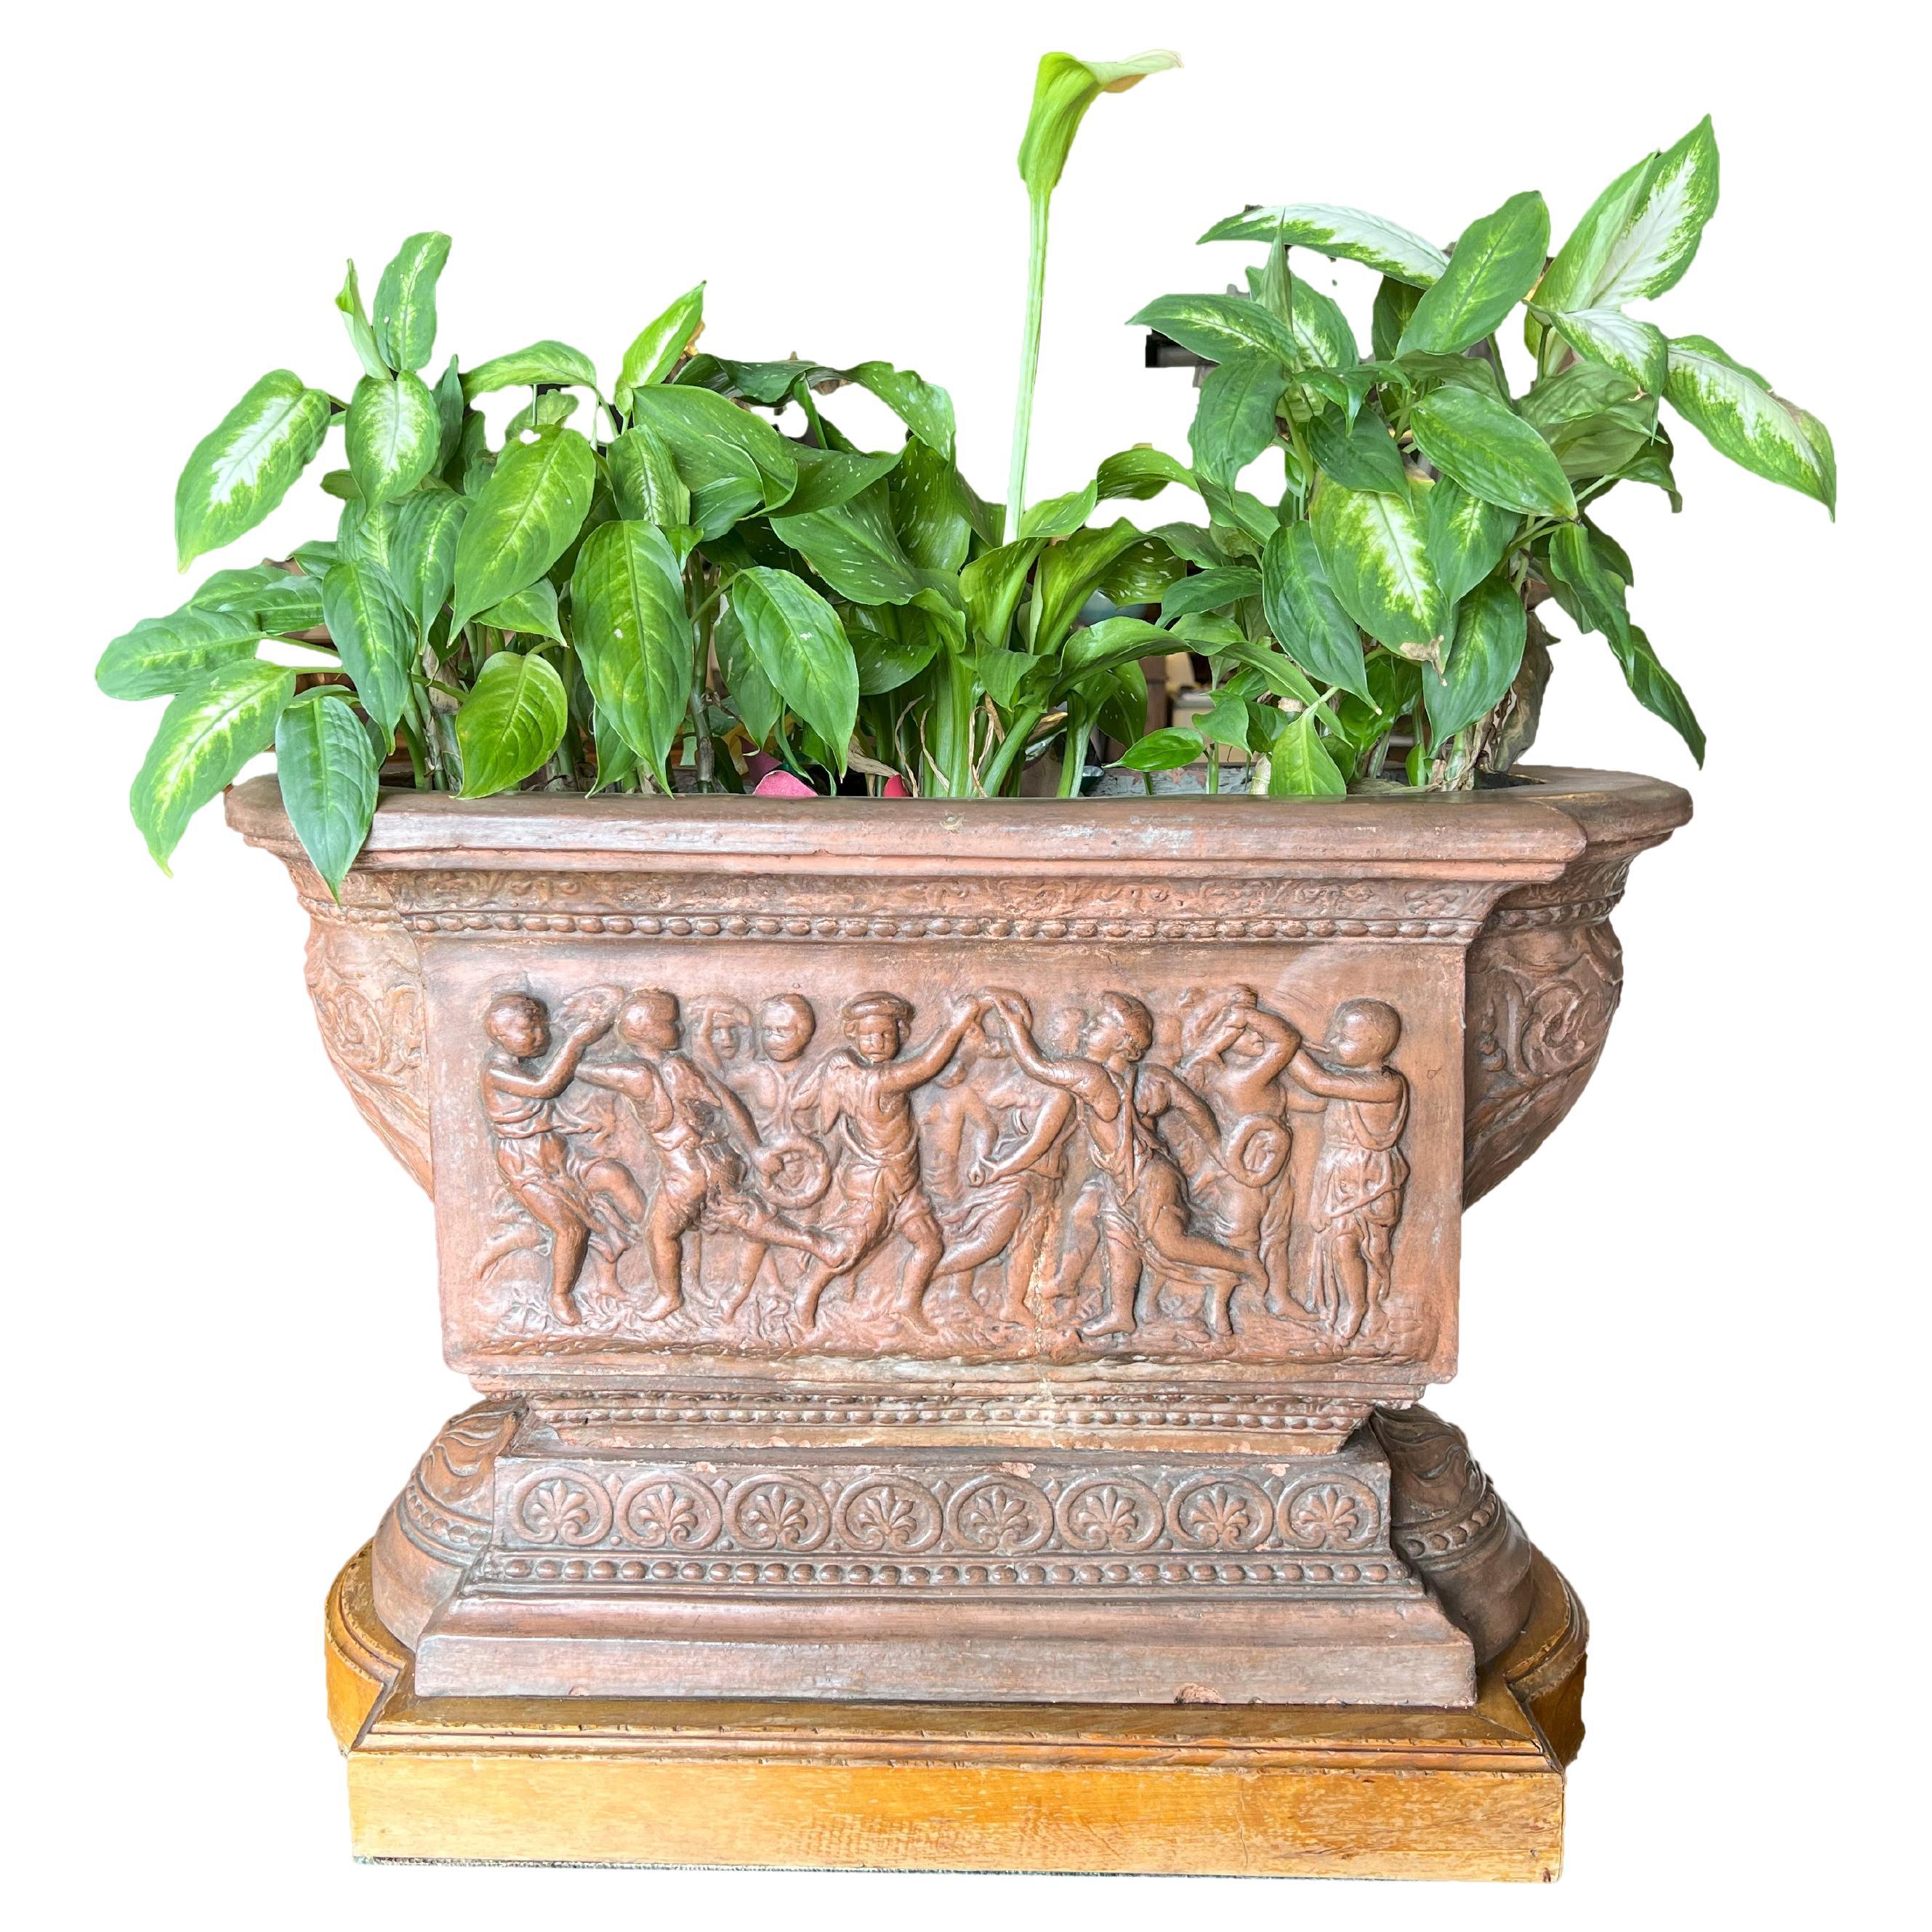 19th C Terracotta Planter Centerpiece with Dancing Cherubs, Florence Circa 1820 For Sale